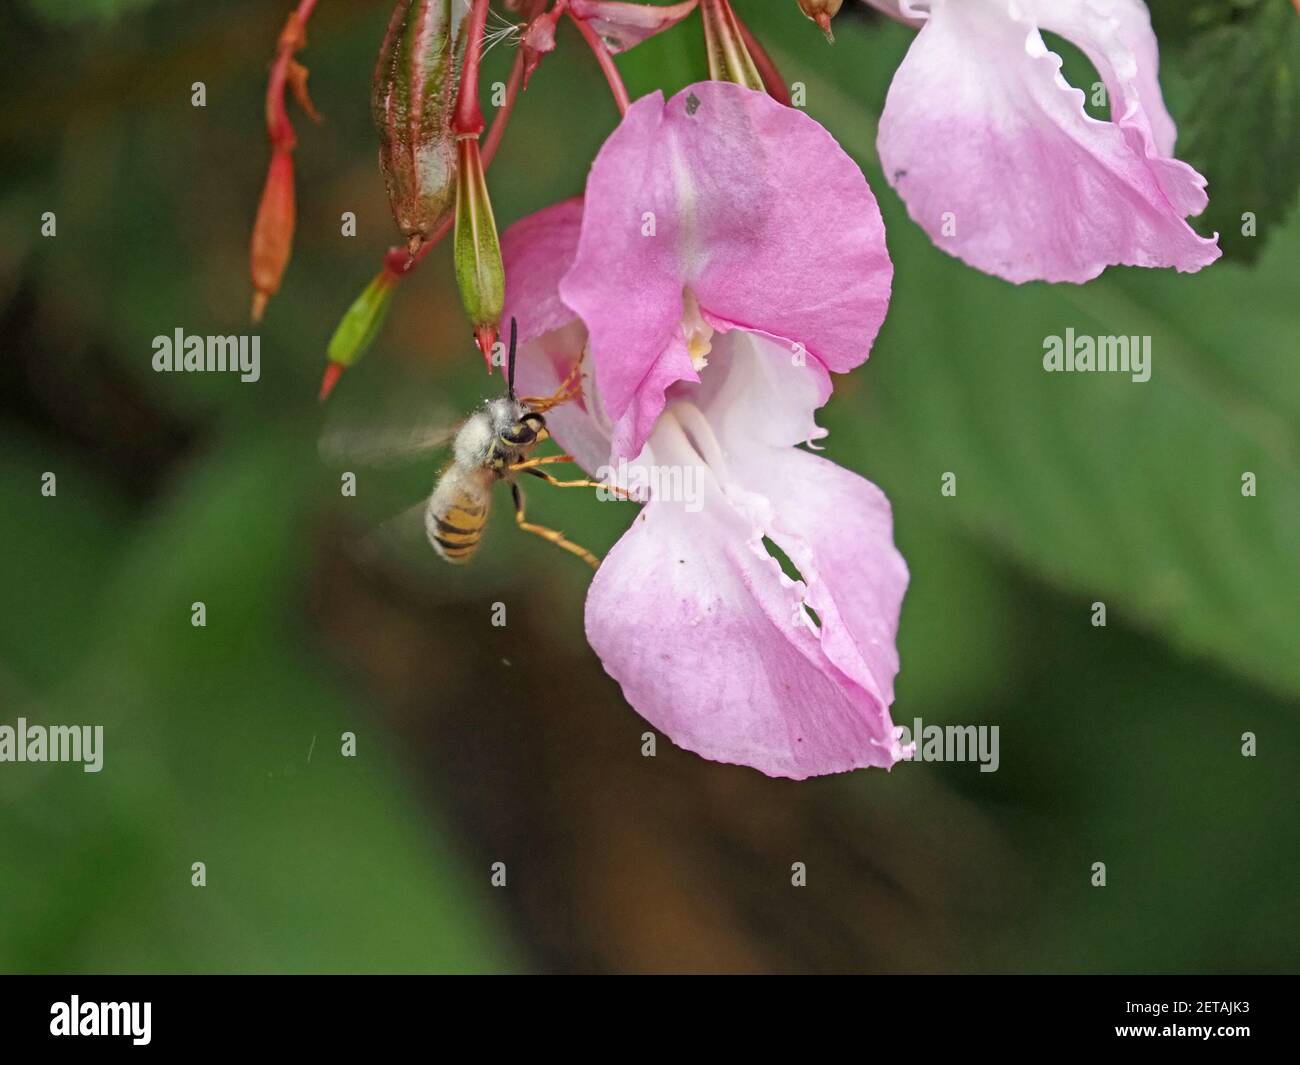 flying common wasp (Vespula vulgaris) coated with white pollen of pink flower of Himalayan Balsam (Impatiens glandulifera) North Yorkshire, England,UK Stock Photo